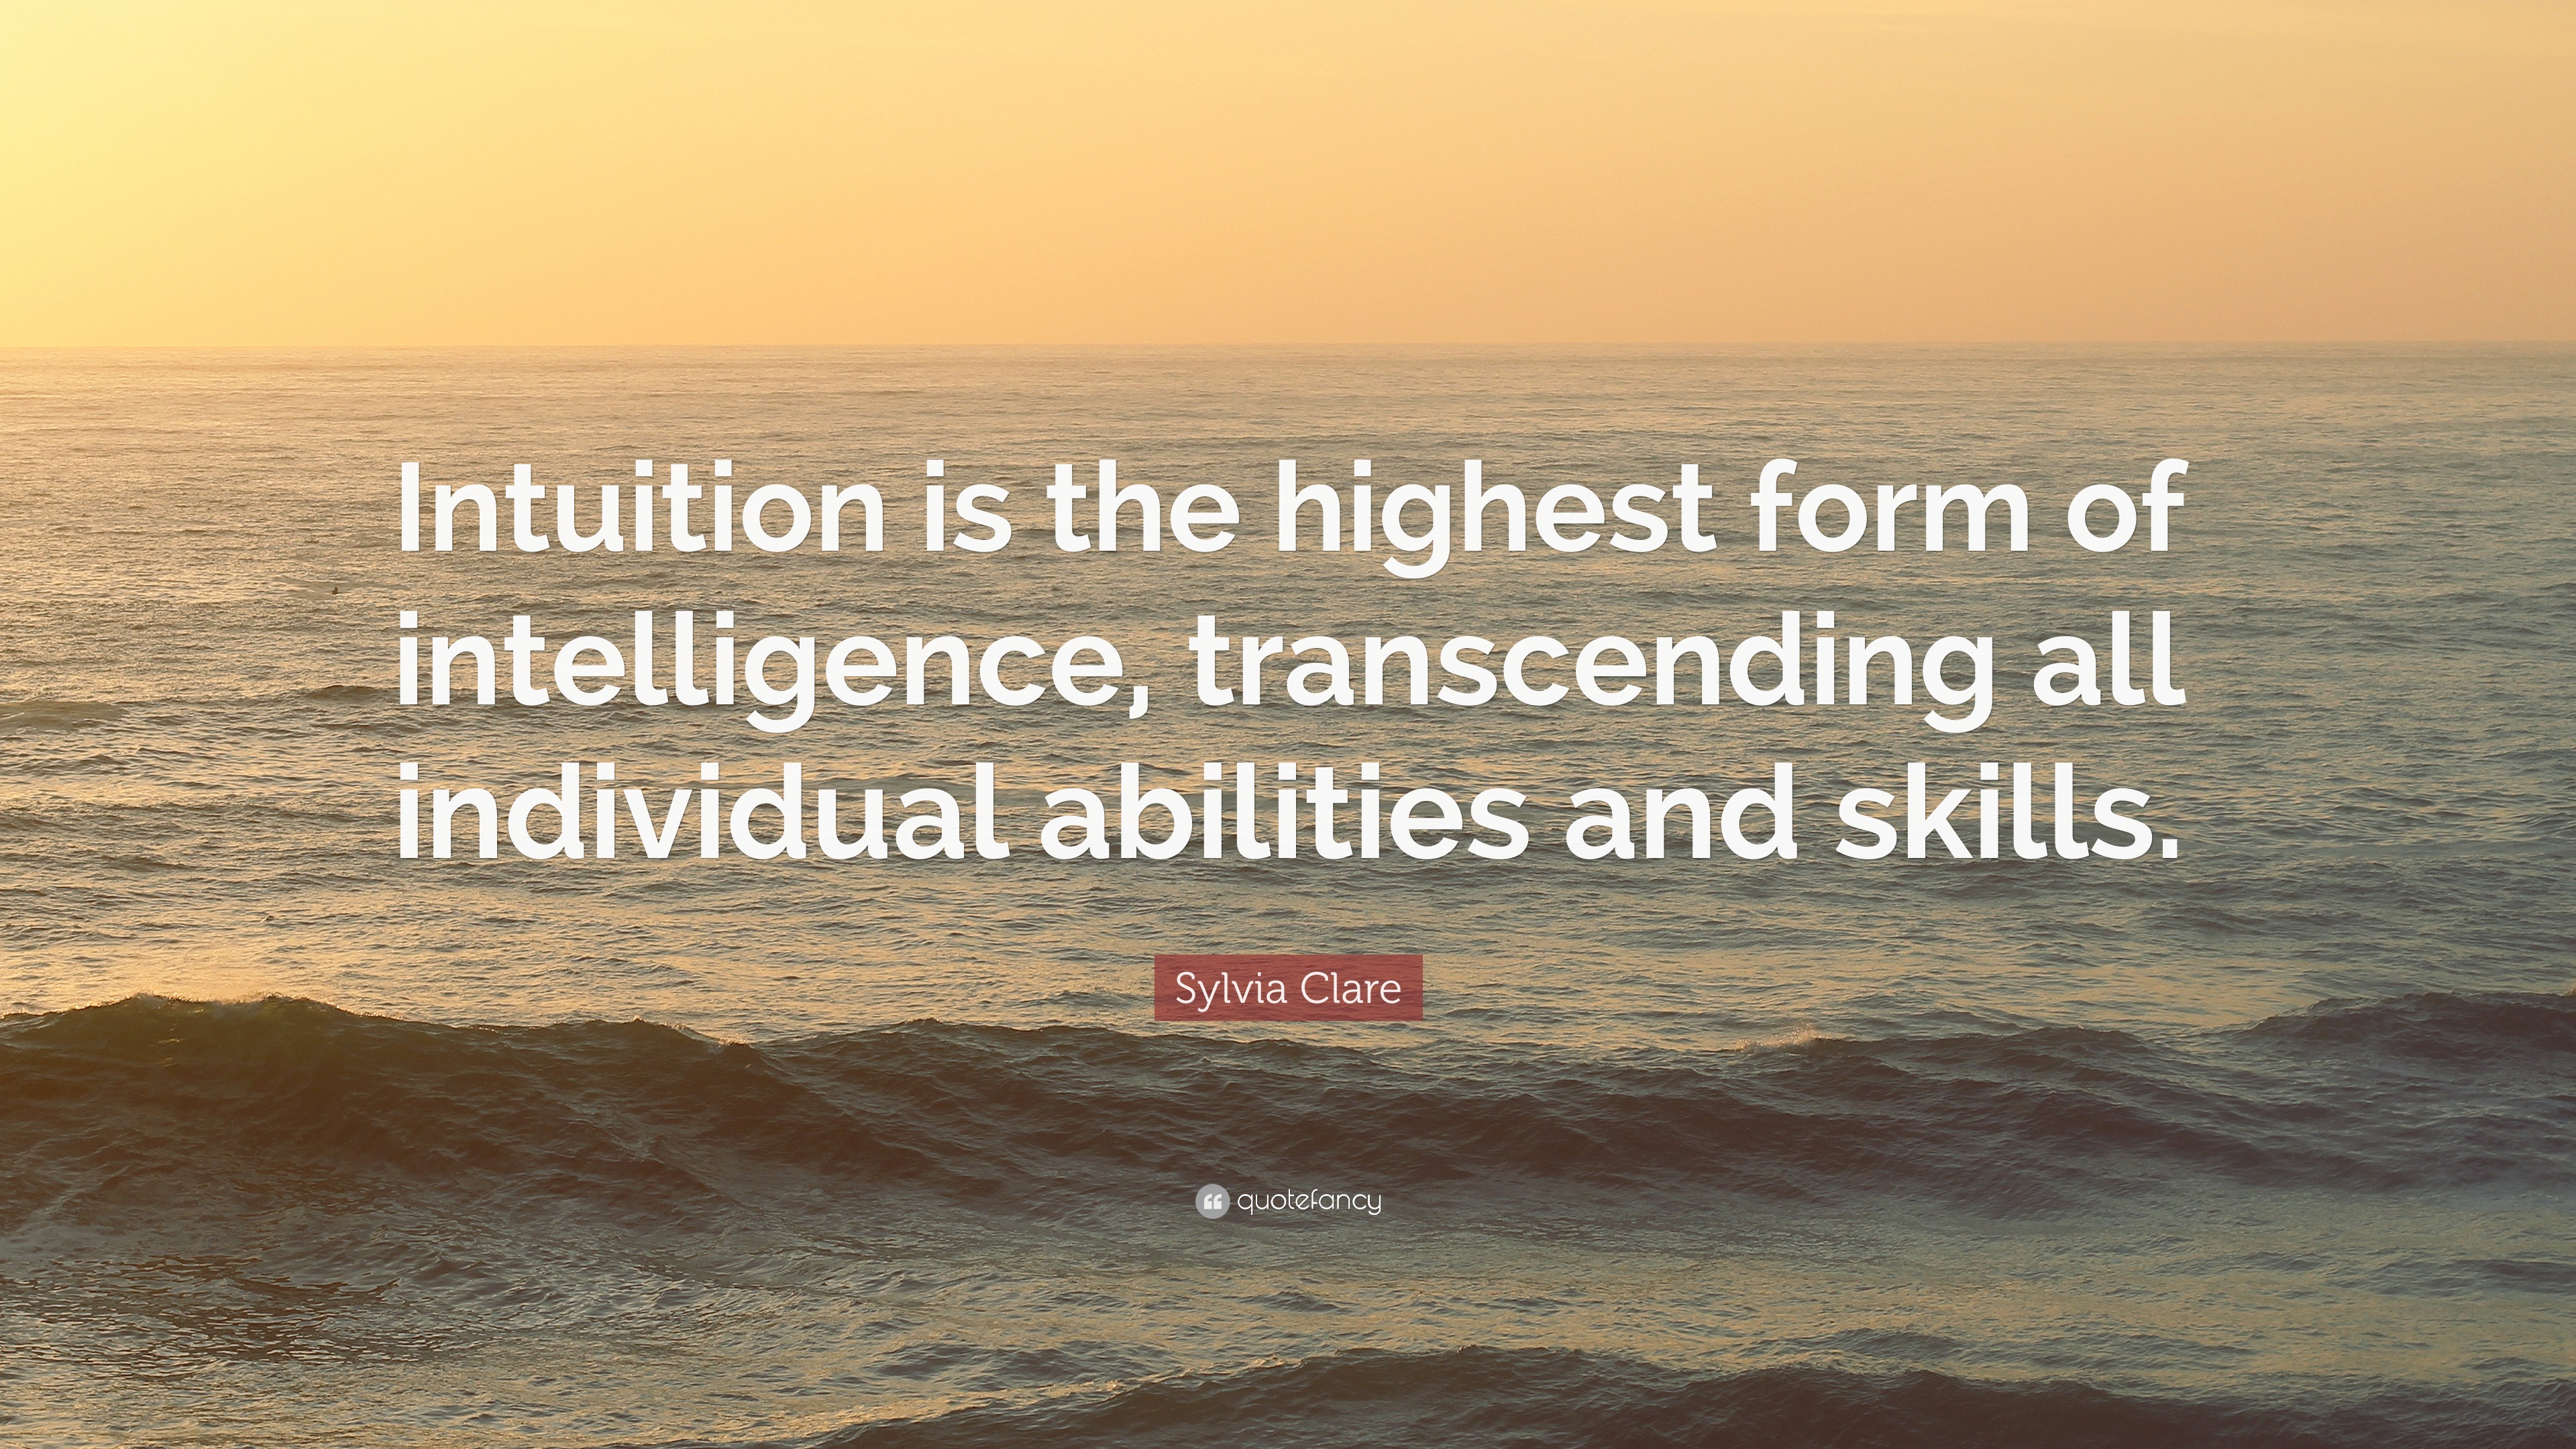 Sylvia Clare Quote “Intuition is the highest form of